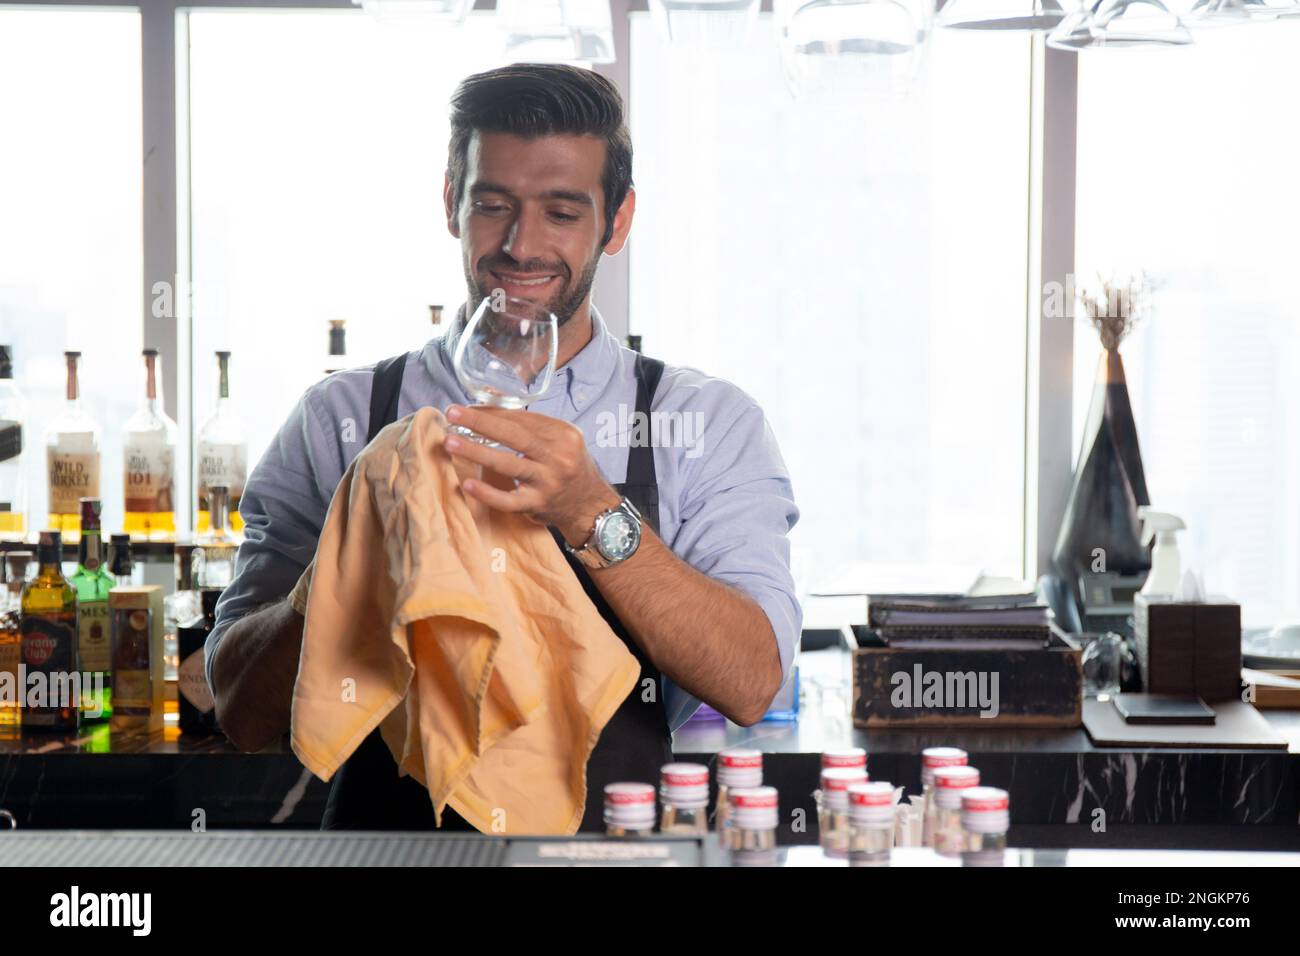 Young caucasian man is bartender cleaning and wipe glass with professional at counter, portrait handsome male preparation glass or wineglass, barman s Stock Photo